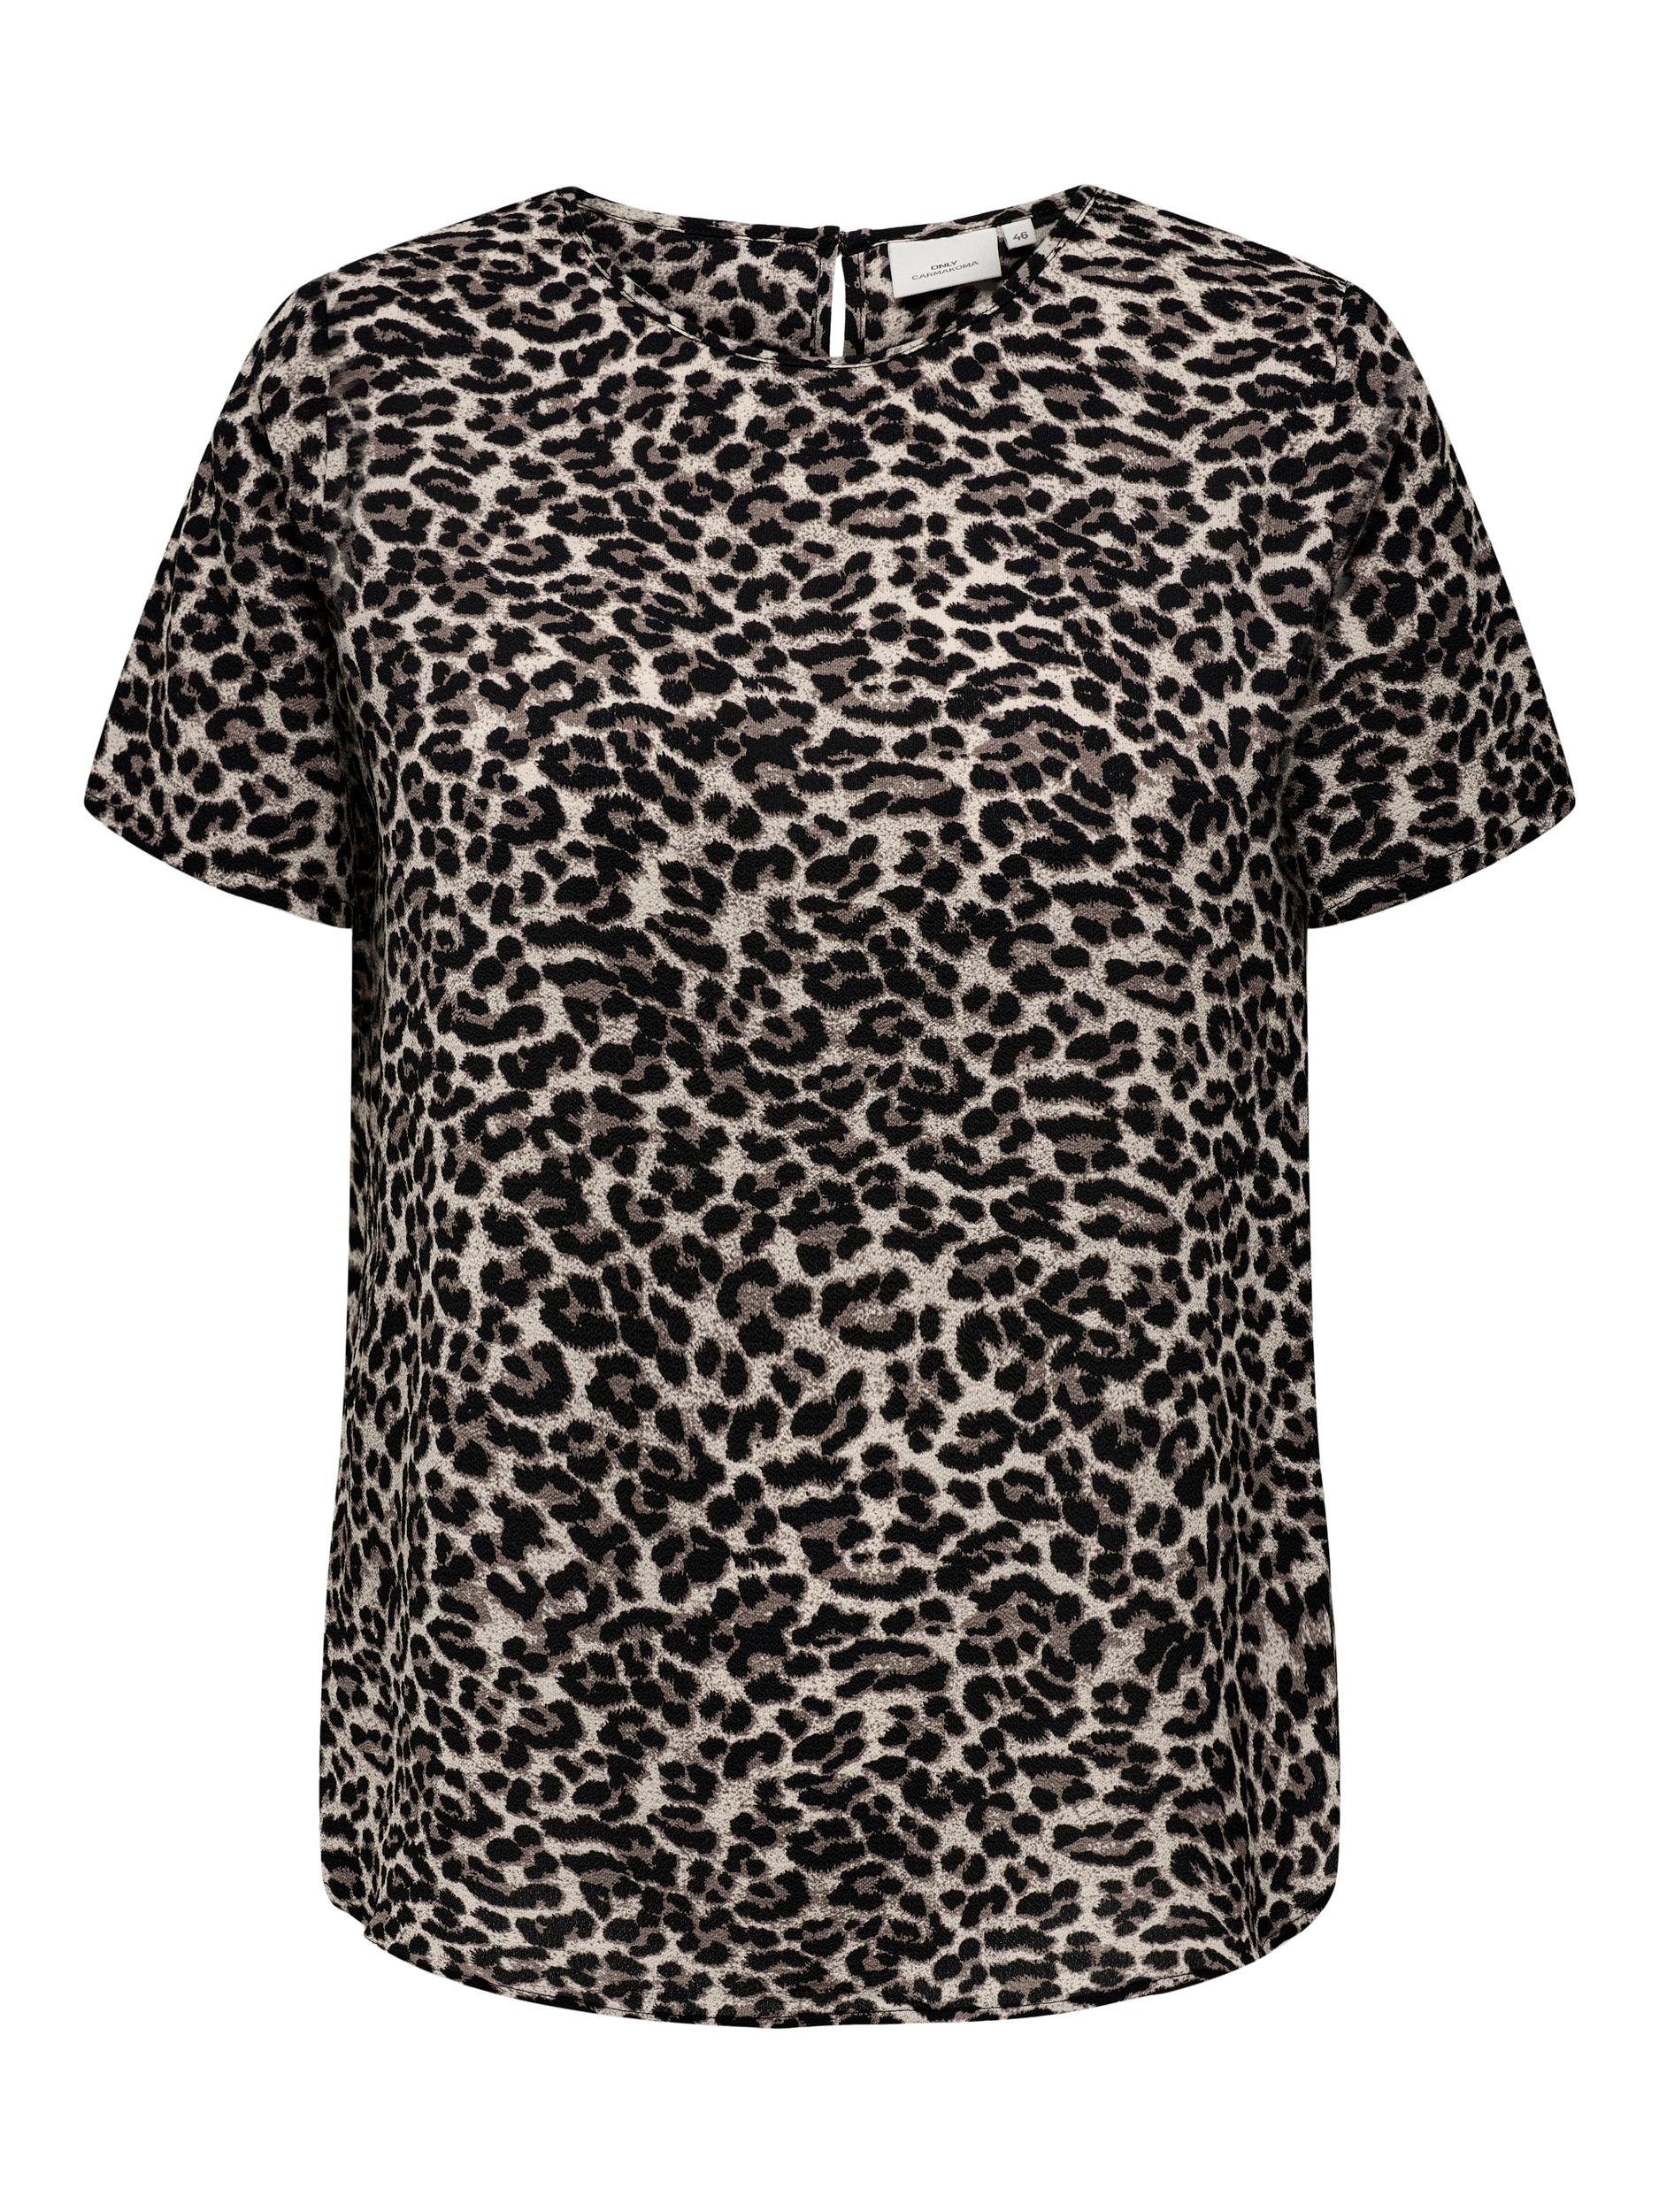 AOP:LEO SS NOOS Stone Pumice CARMAKOMA ONLY CARVICA AOP TOP Shirtbluse WVN